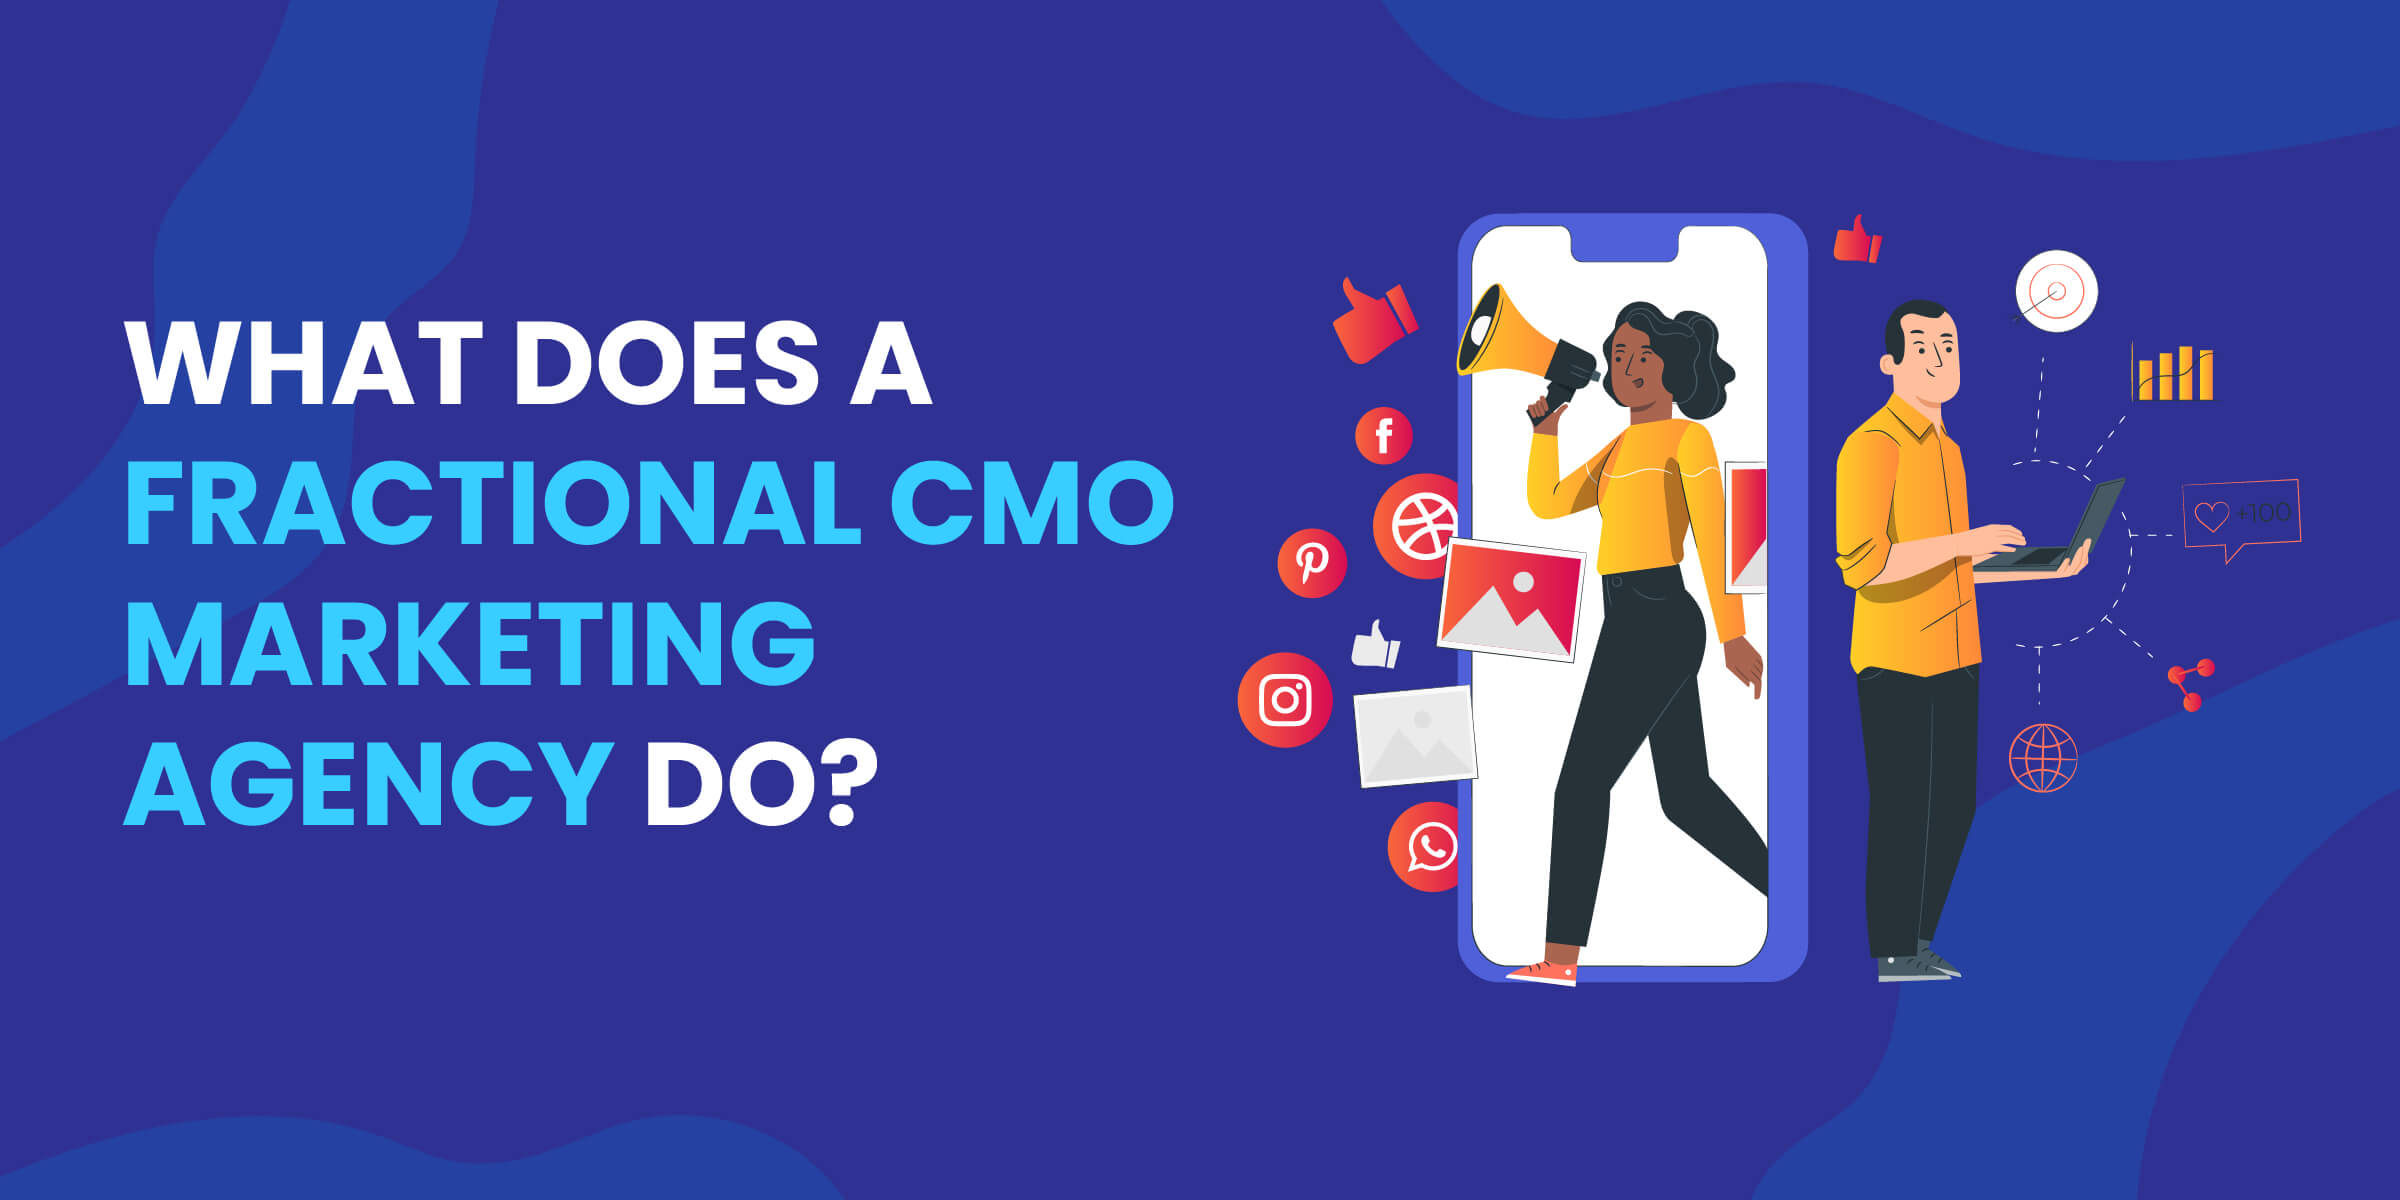 What Does a Fractional CMO Marketing Agency Do